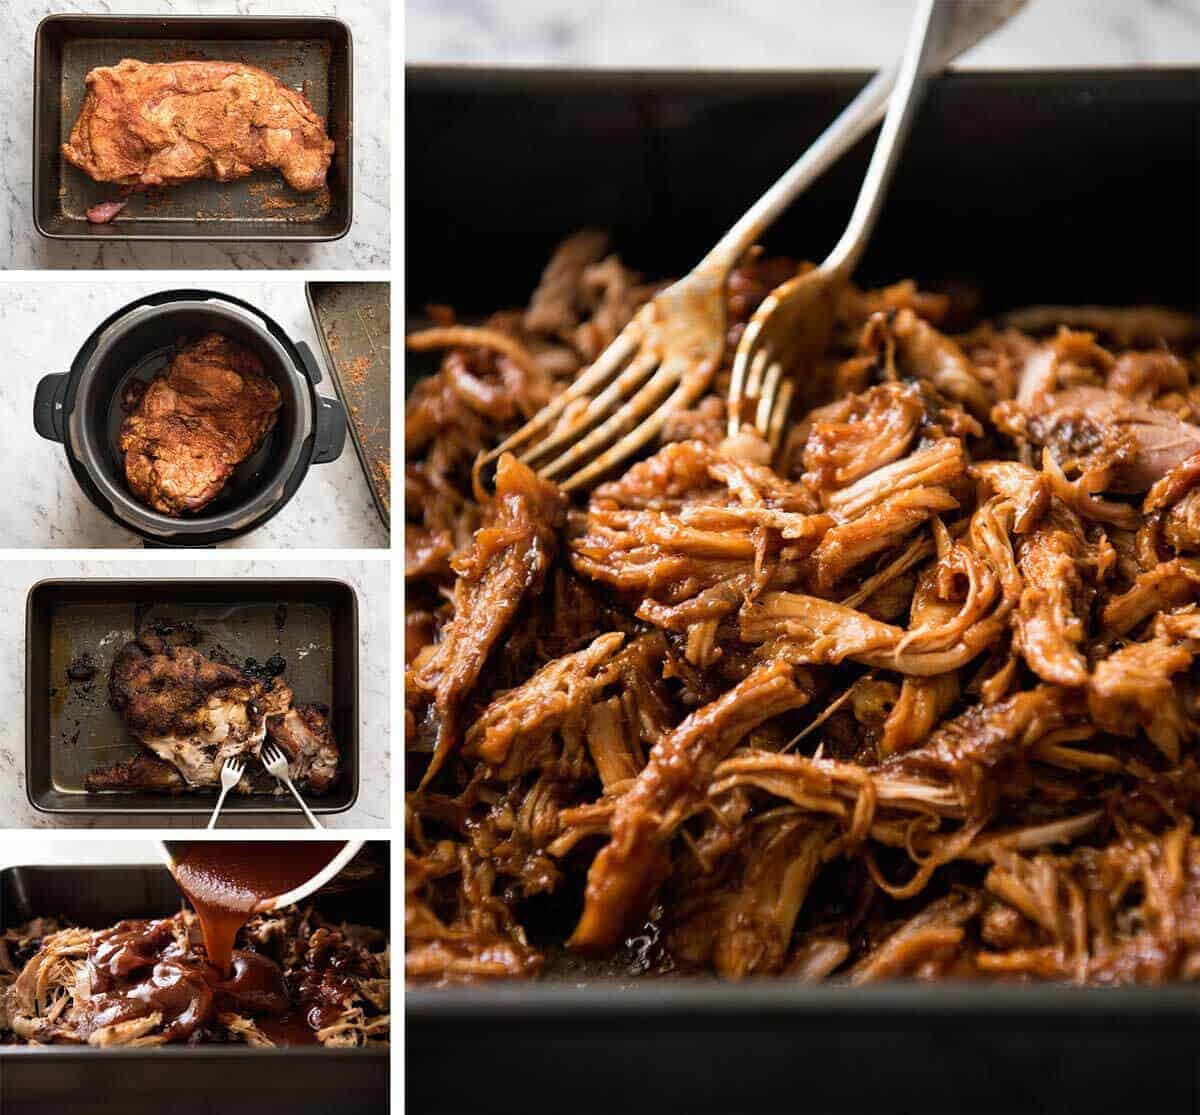 Slow Cooker BBQ Pulled Pork Sandwich - Perfectly seasoned, tender shredded pork mixed in a homemade barbecue sauce, stacked on bread with coleslaw. Slow cooker, pressure cooker or oven. www.recipetineats.com